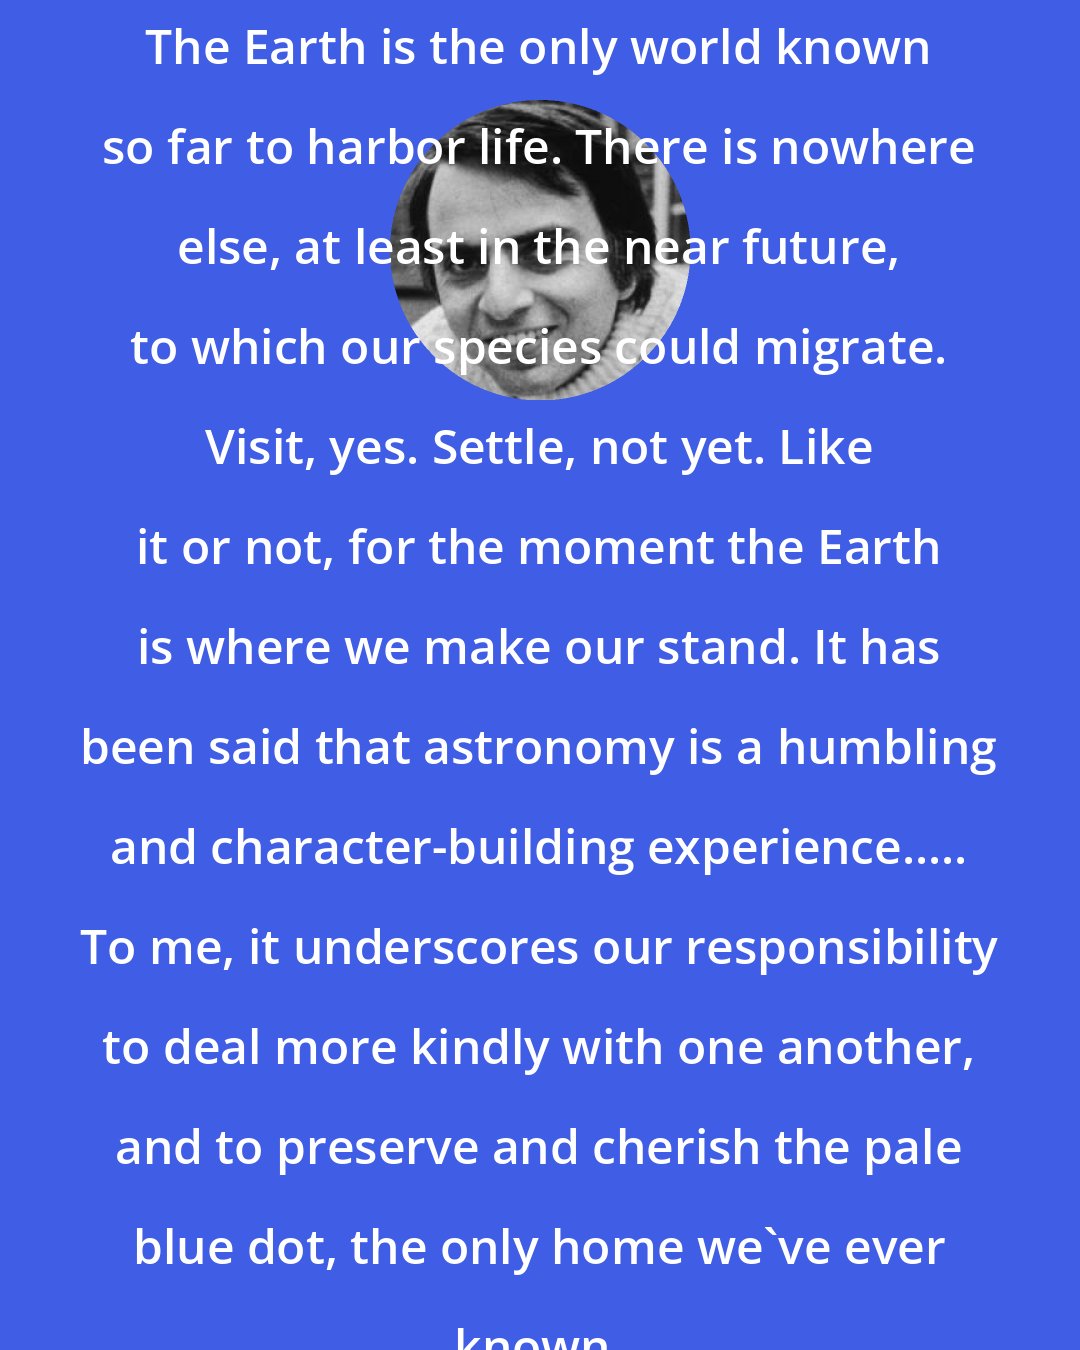 Carl Sagan: The Earth is the only world known so far to harbor life. There is nowhere else, at least in the near future, to which our species could migrate. Visit, yes. Settle, not yet. Like it or not, for the moment the Earth is where we make our stand. It has been said that astronomy is a humbling and character-building experience..... To me, it underscores our responsibility to deal more kindly with one another, and to preserve and cherish the pale blue dot, the only home we've ever known.